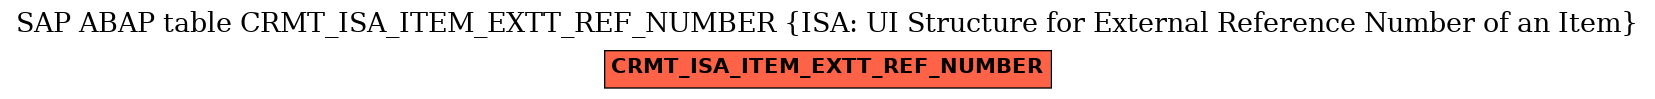 E-R Diagram for table CRMT_ISA_ITEM_EXTT_REF_NUMBER (ISA: UI Structure for External Reference Number of an Item)